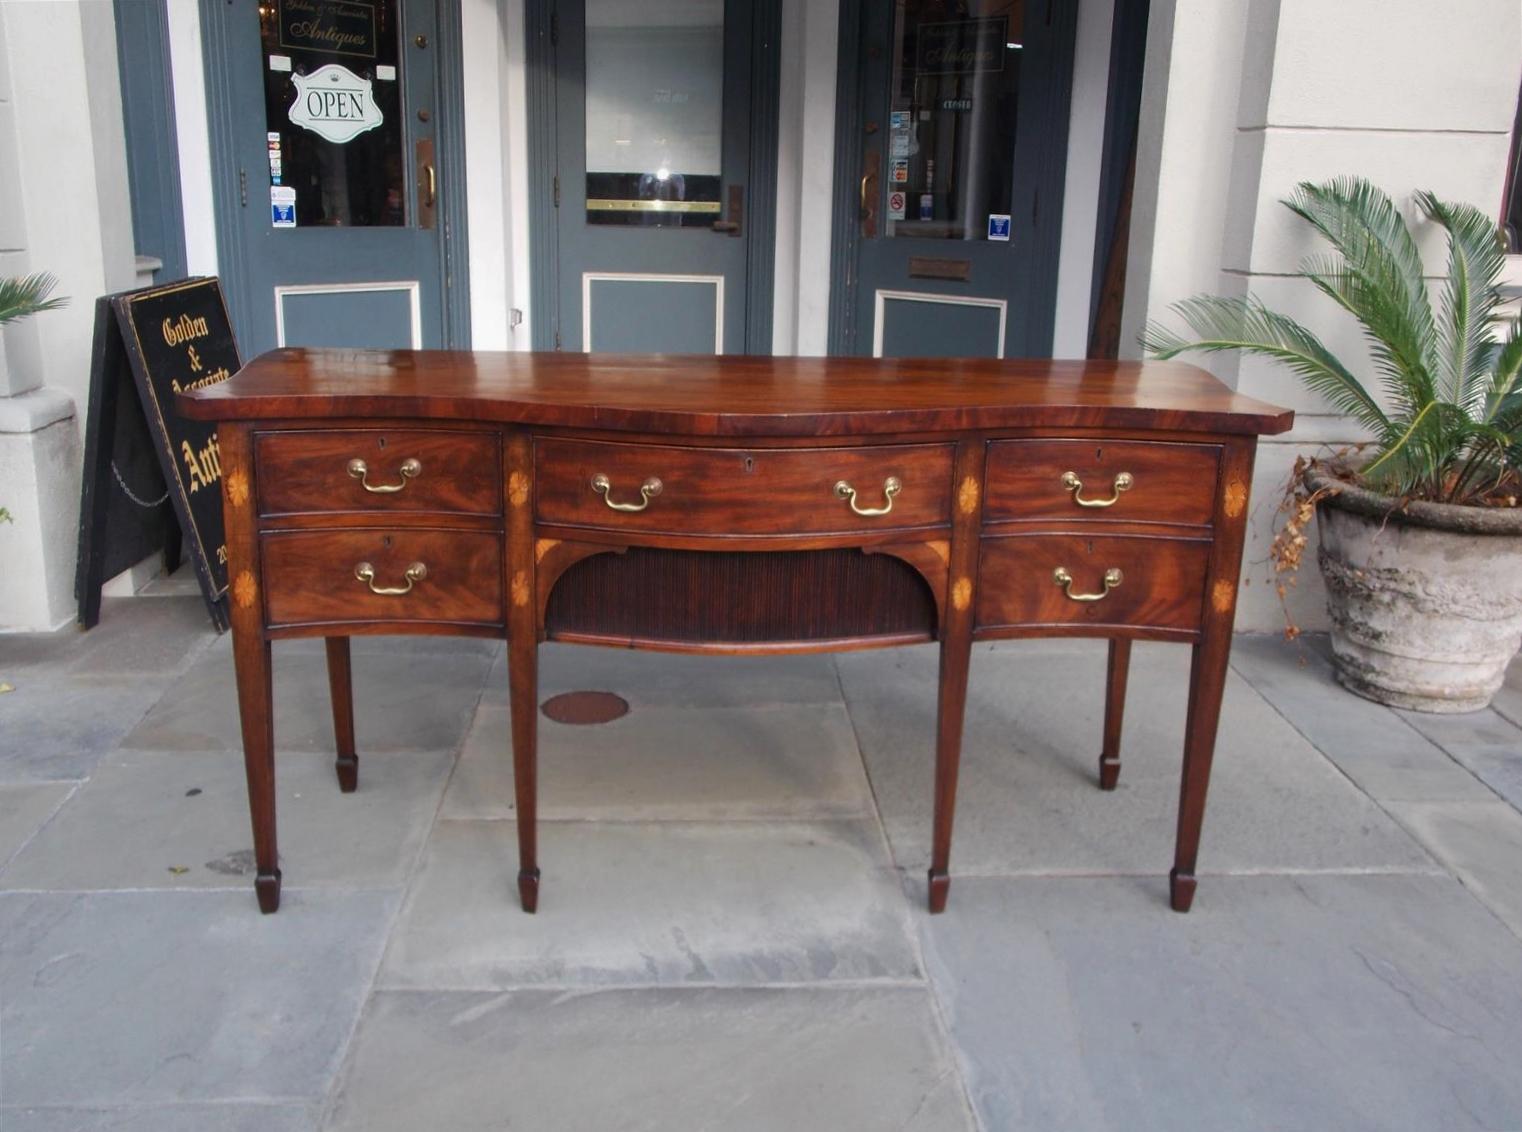 English mahogany serpentine sideboard with a centered drawer over two sliding tambour doors, flanking end drawers, original brasses, oval satinwood patera inlays, and terminating on tapered legs with spade feet, Late 18th century.